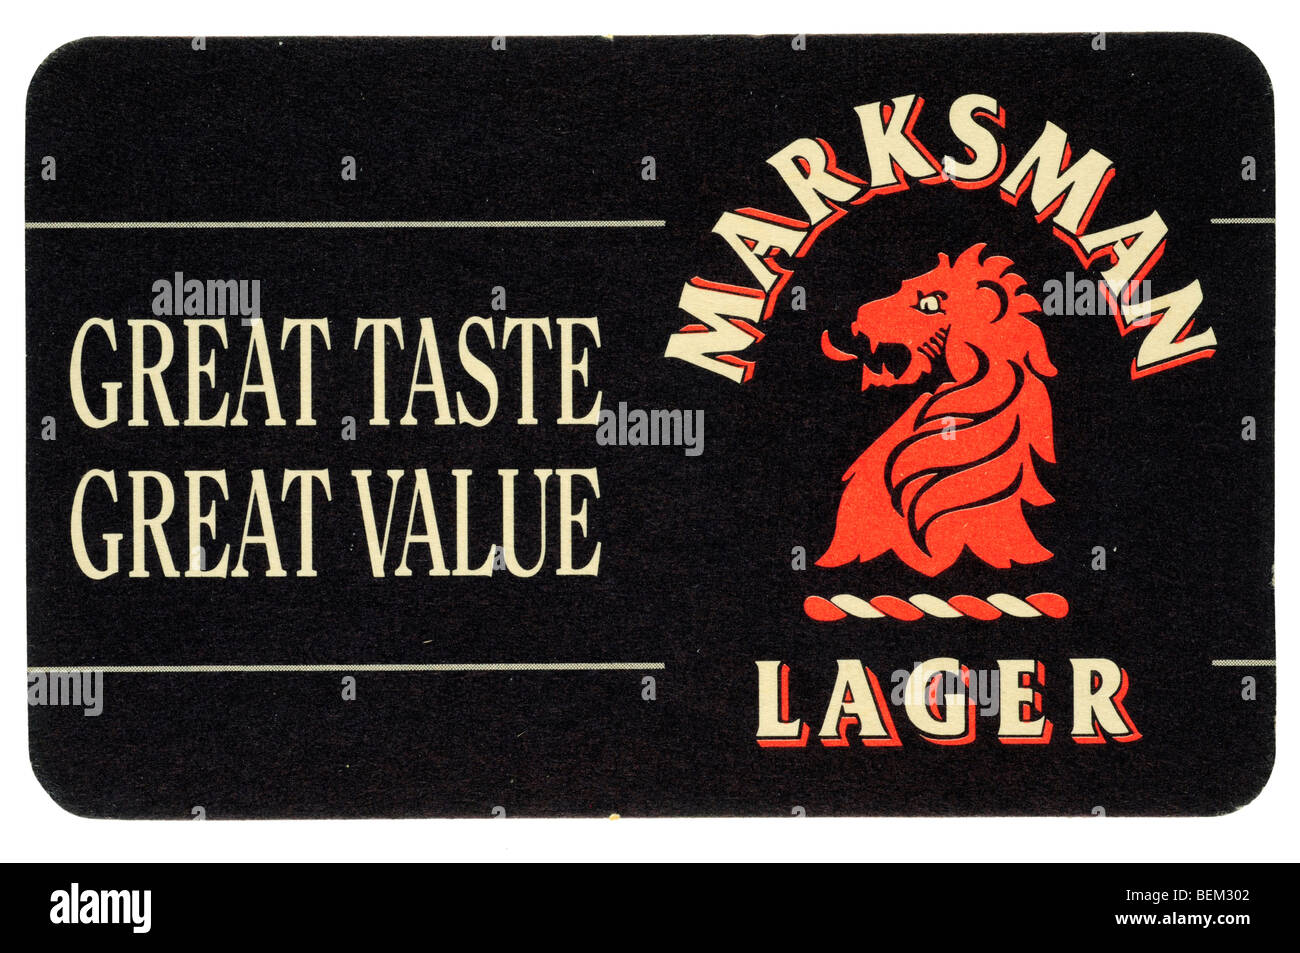 marksman lager great taste great value Stock Photo